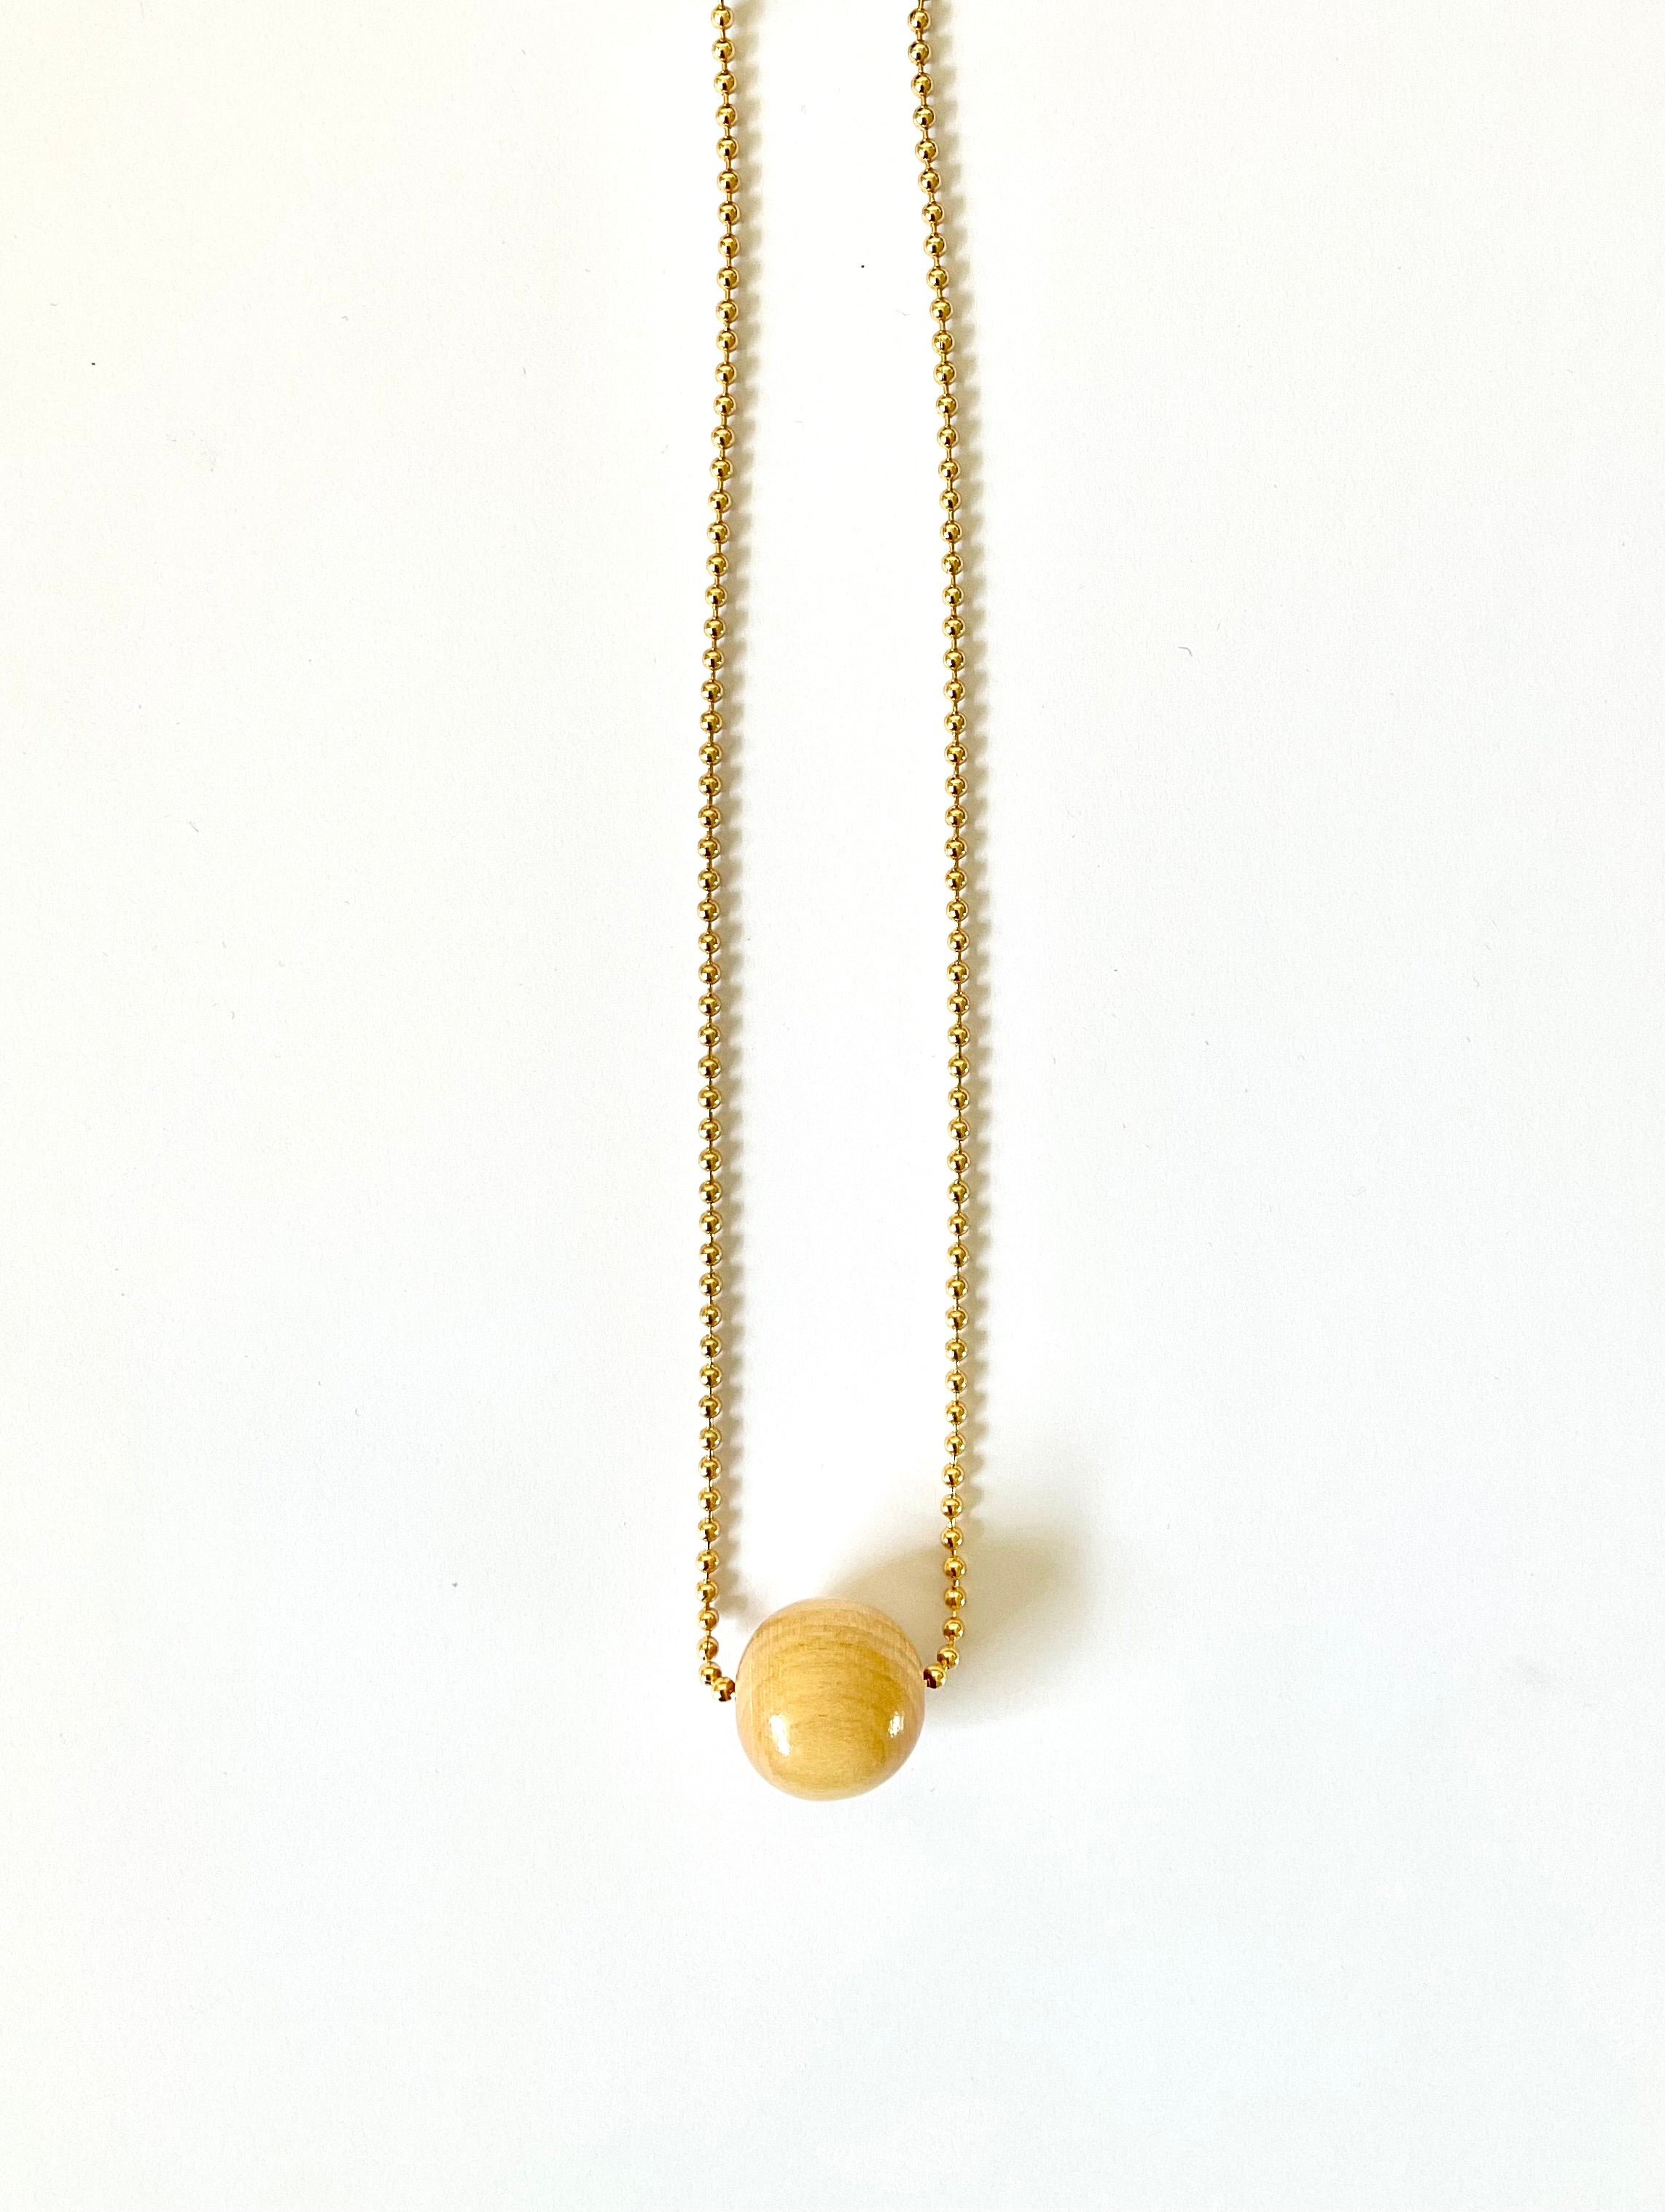 MINI BALLER CHAIN NECKLACE WITH WOOD ORB